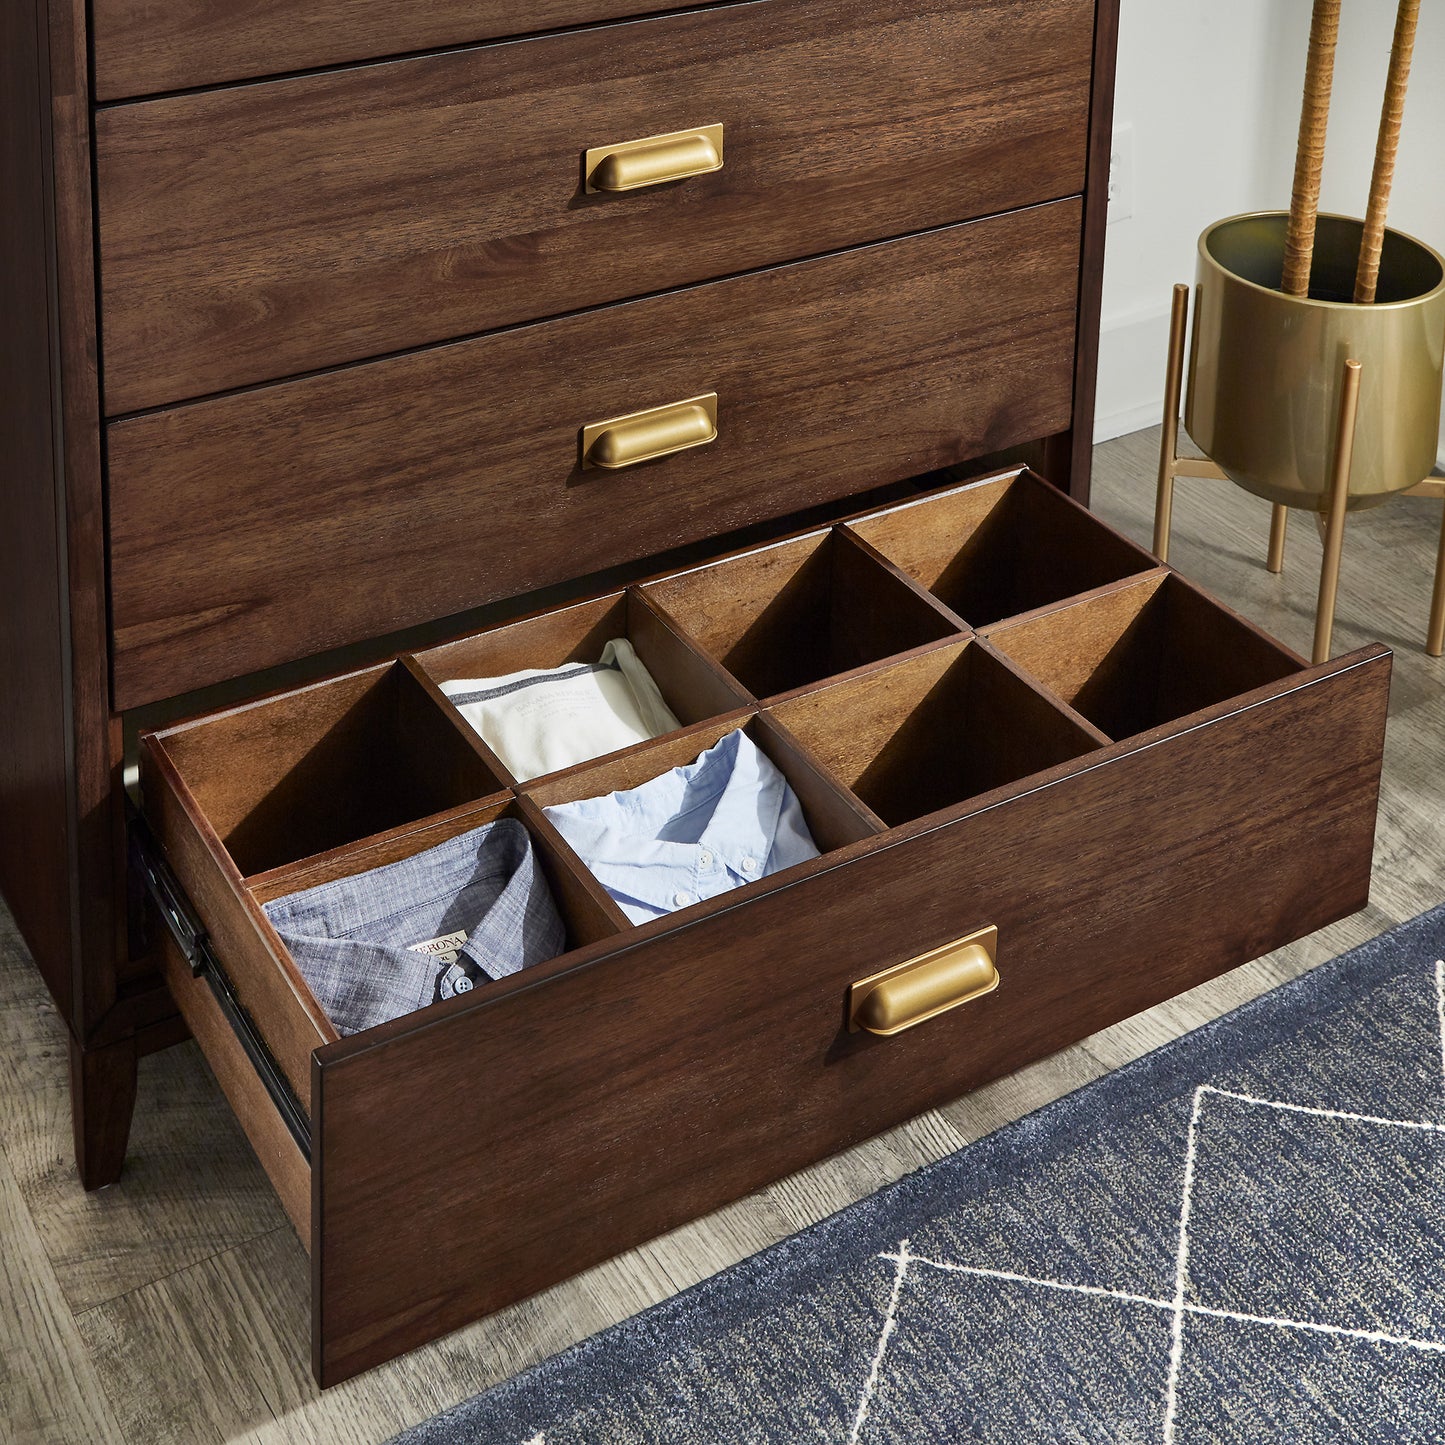 36" Wide 5 - Drawer Campaign Chest - Walnut Finish, Gold Accent